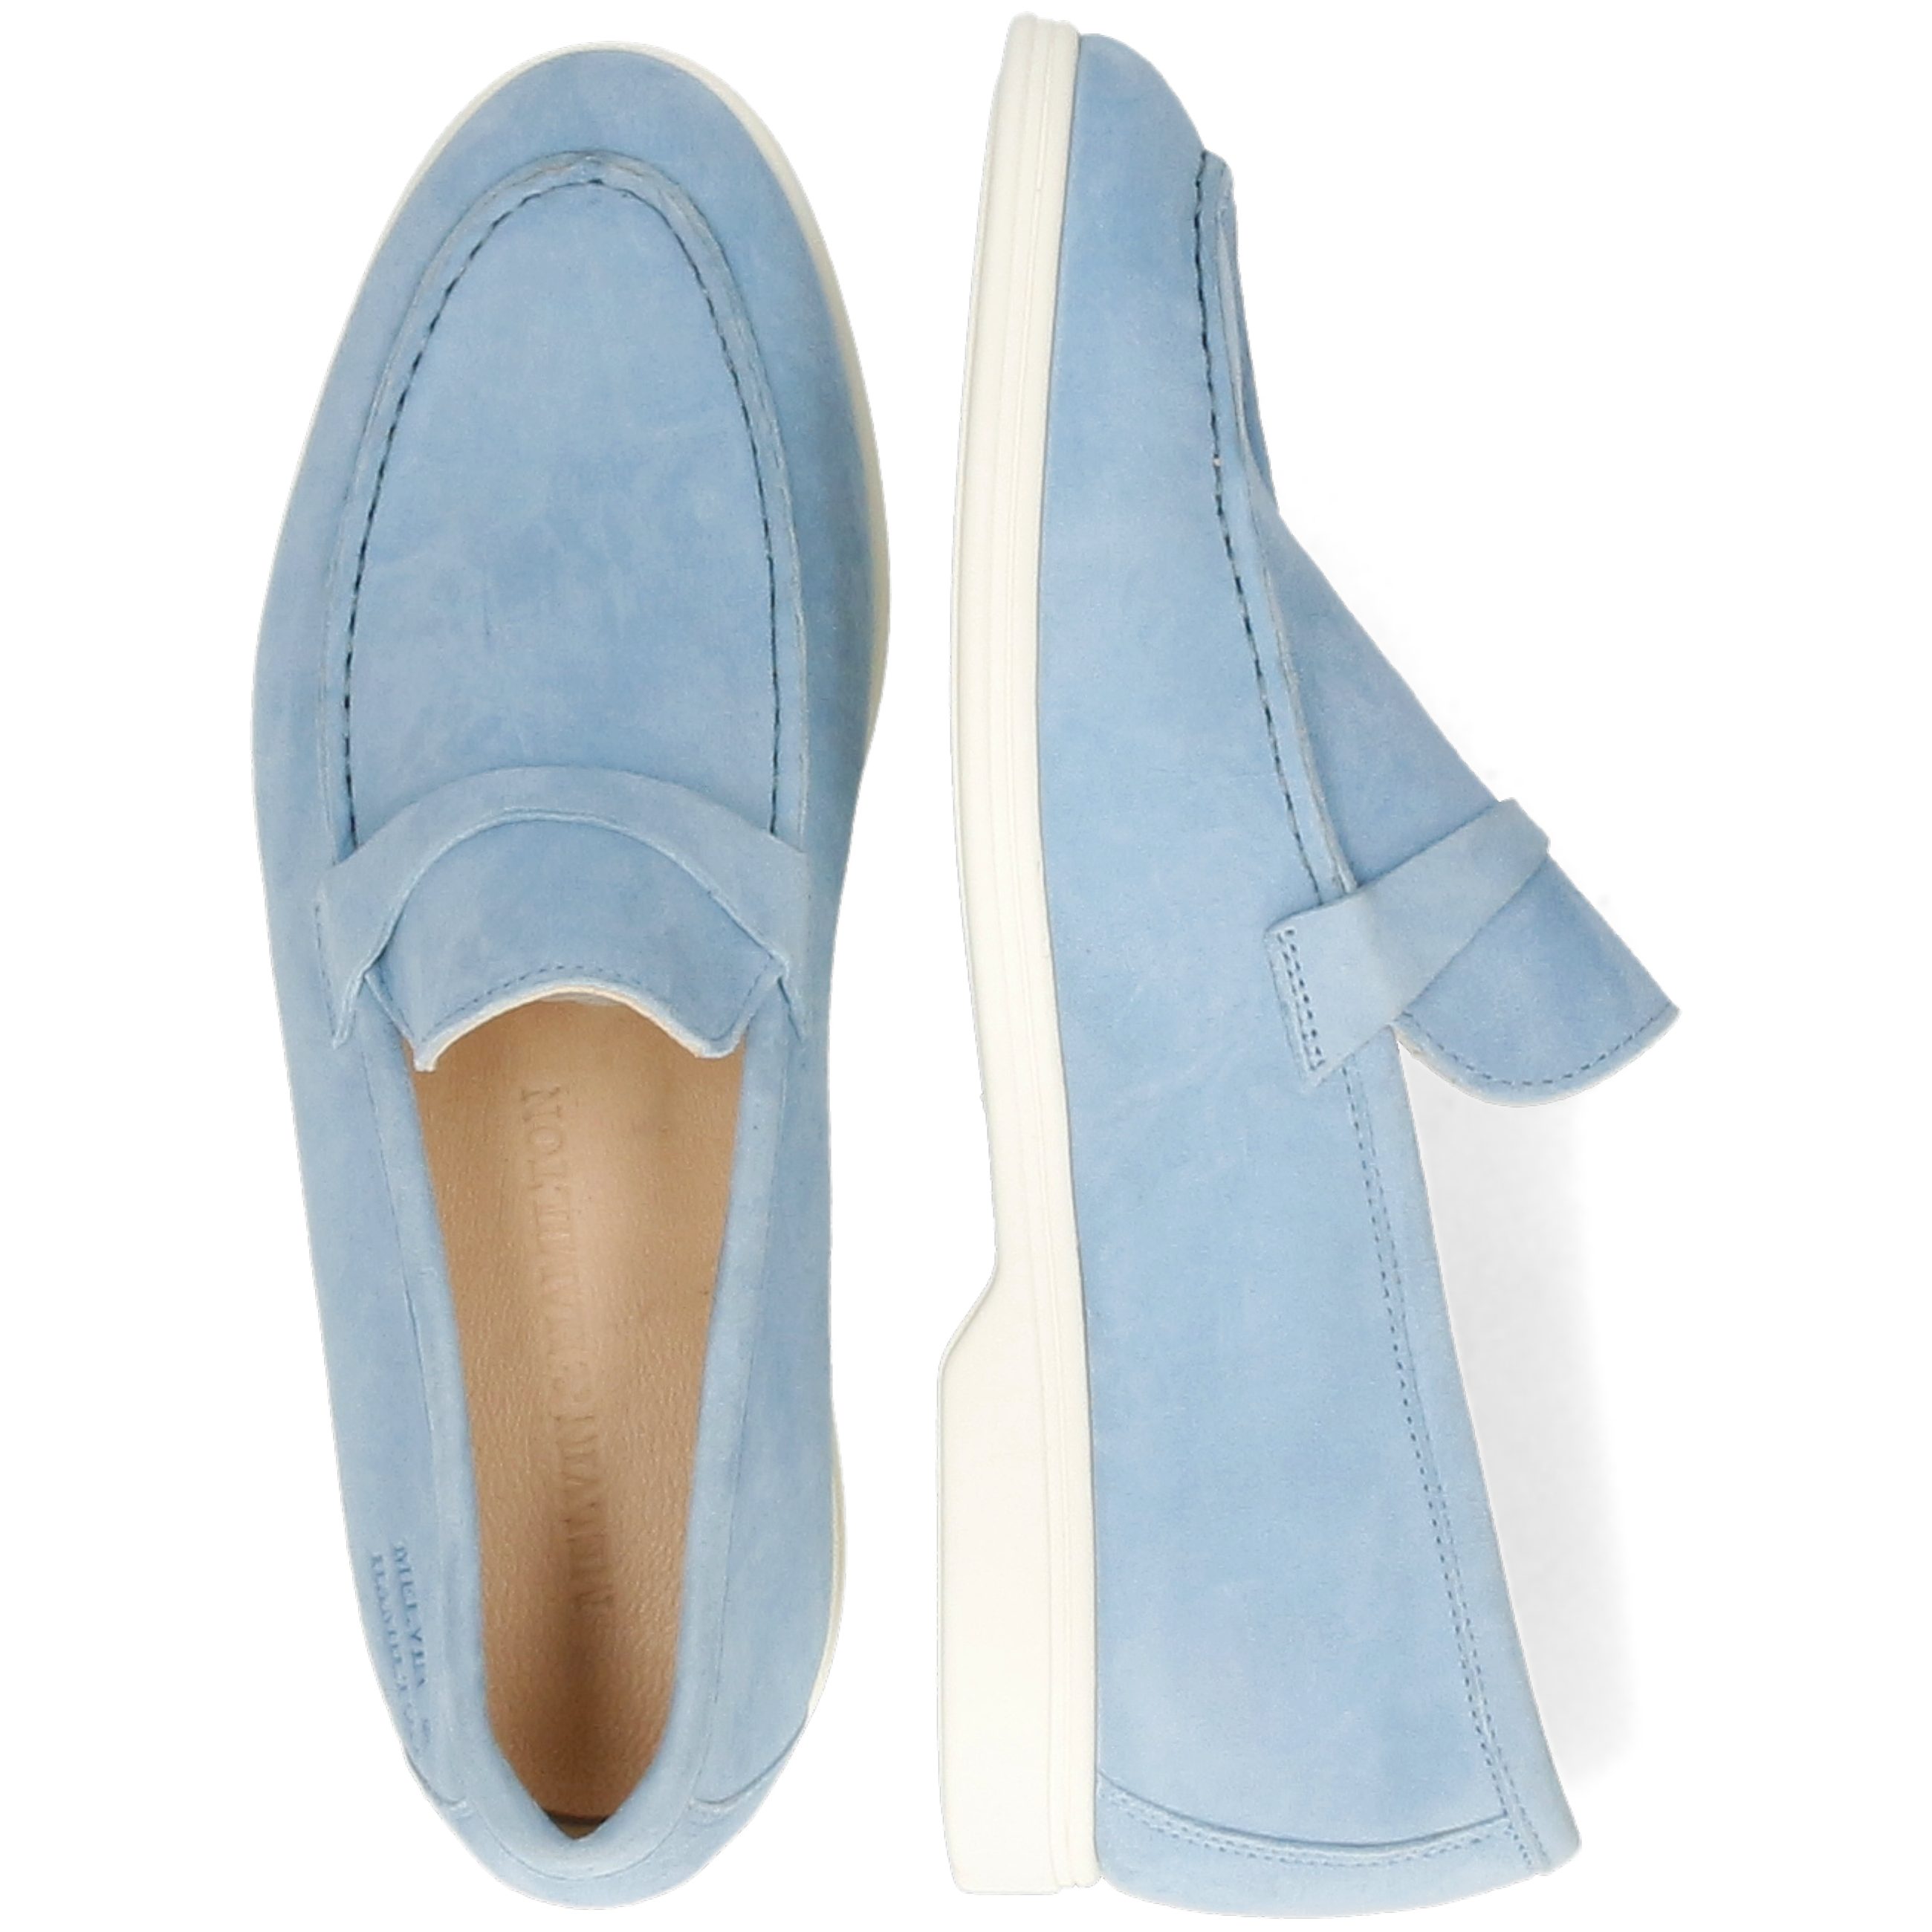 Melvin & Hamilton Adley 3 Sky Suede Accessory Goat Loafer